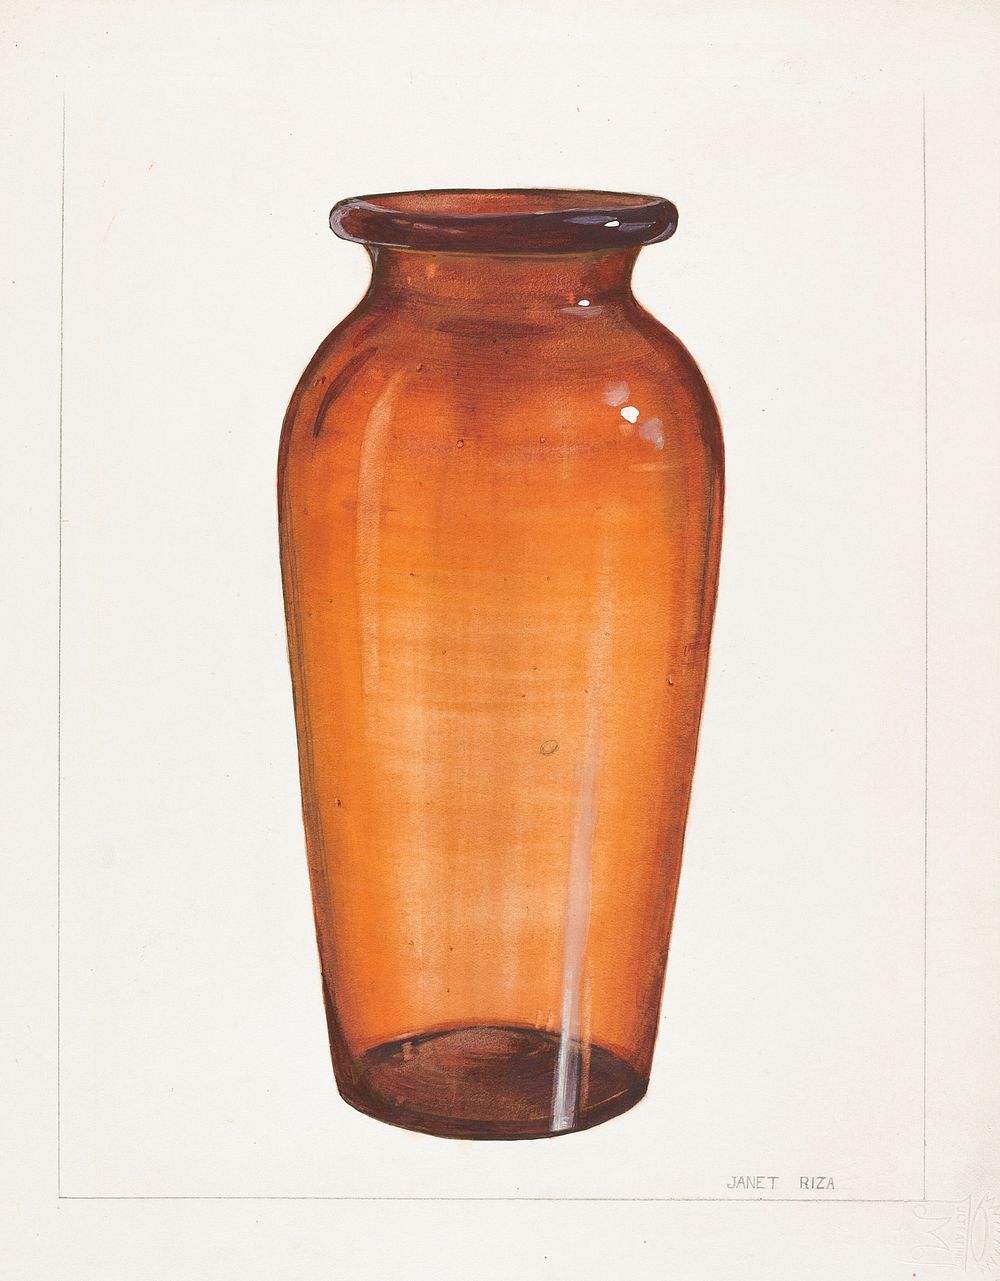 Vase (ca.1936) by Janet Riza. Original from The National Gallery of Art. Digitally enhanced by rawpixel.